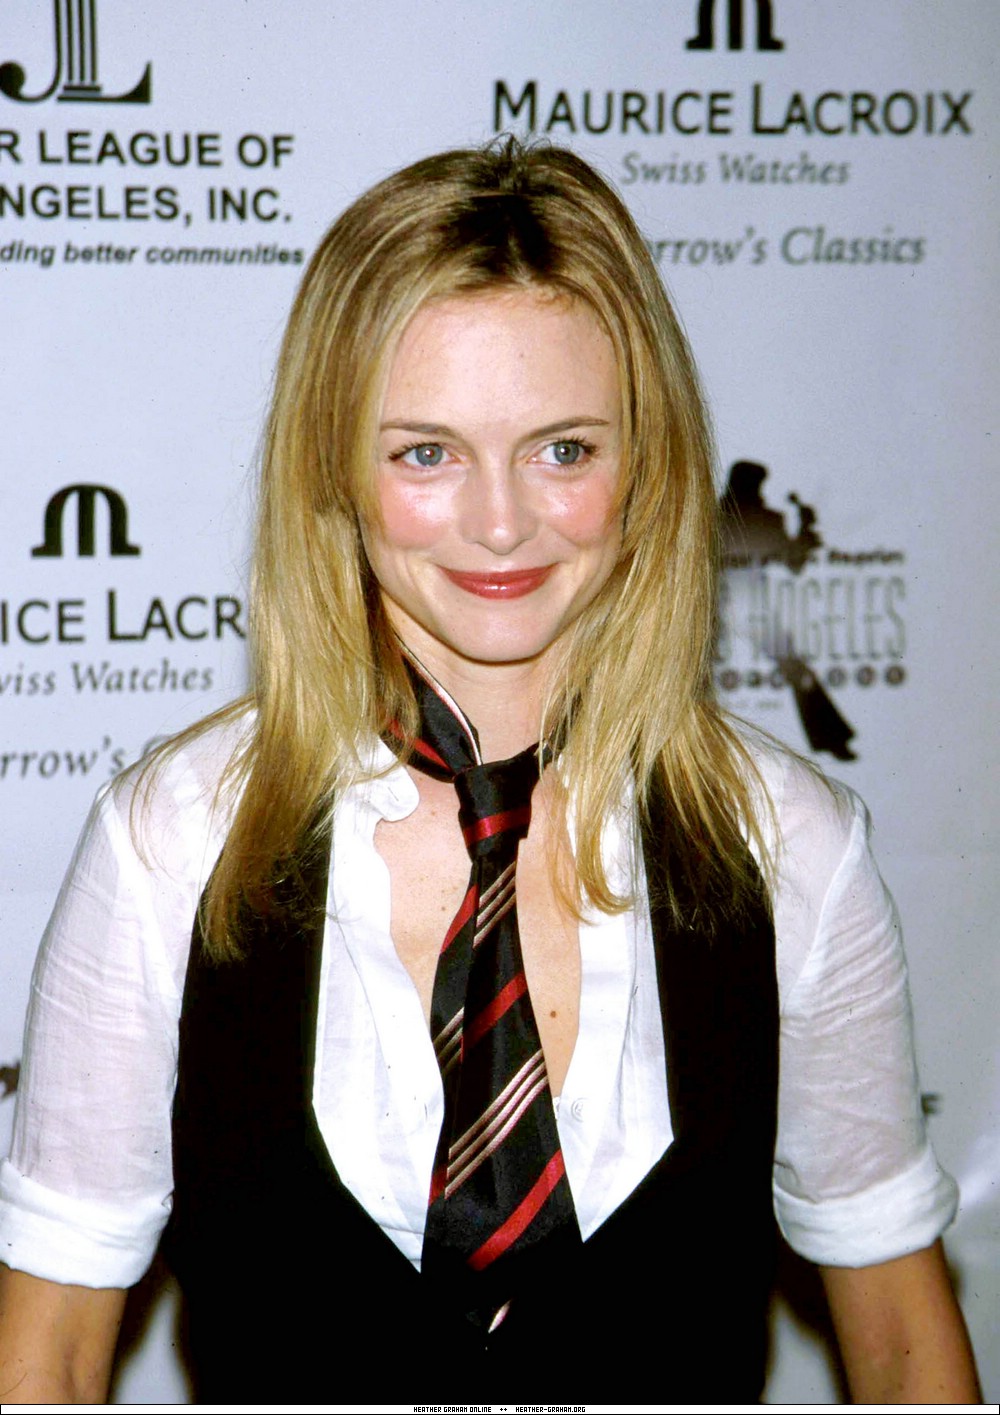 Heather Graham leaked wallpapers